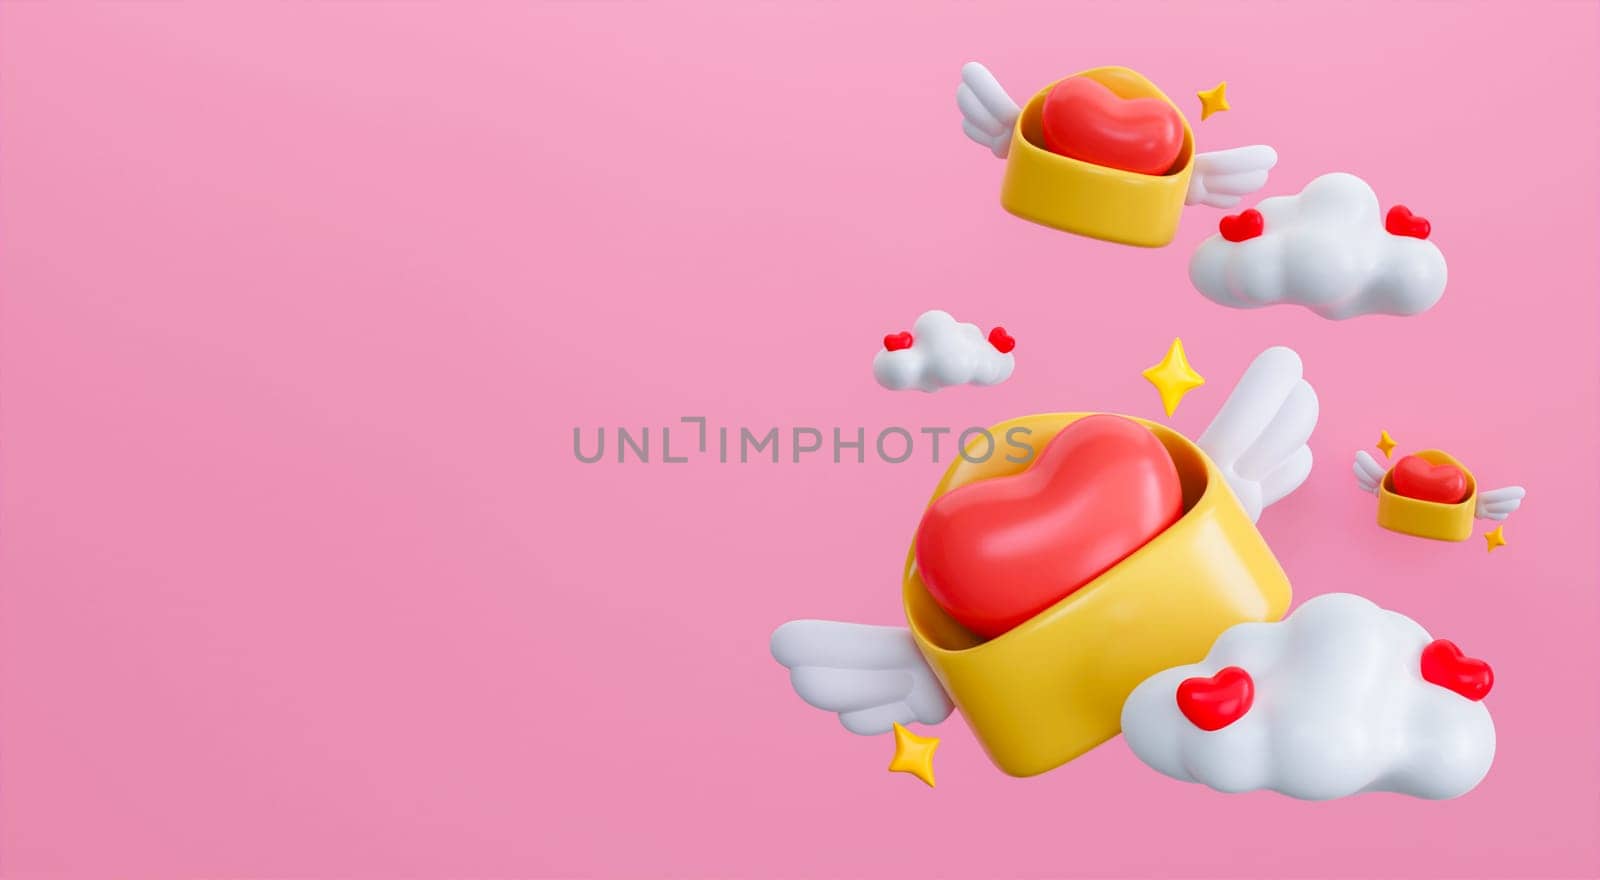 Yellow envelope with wings and red heart. Be my Valentine. Happy Valentine's Day banner copy space for text. 3D rendering illustration by meepiangraphic